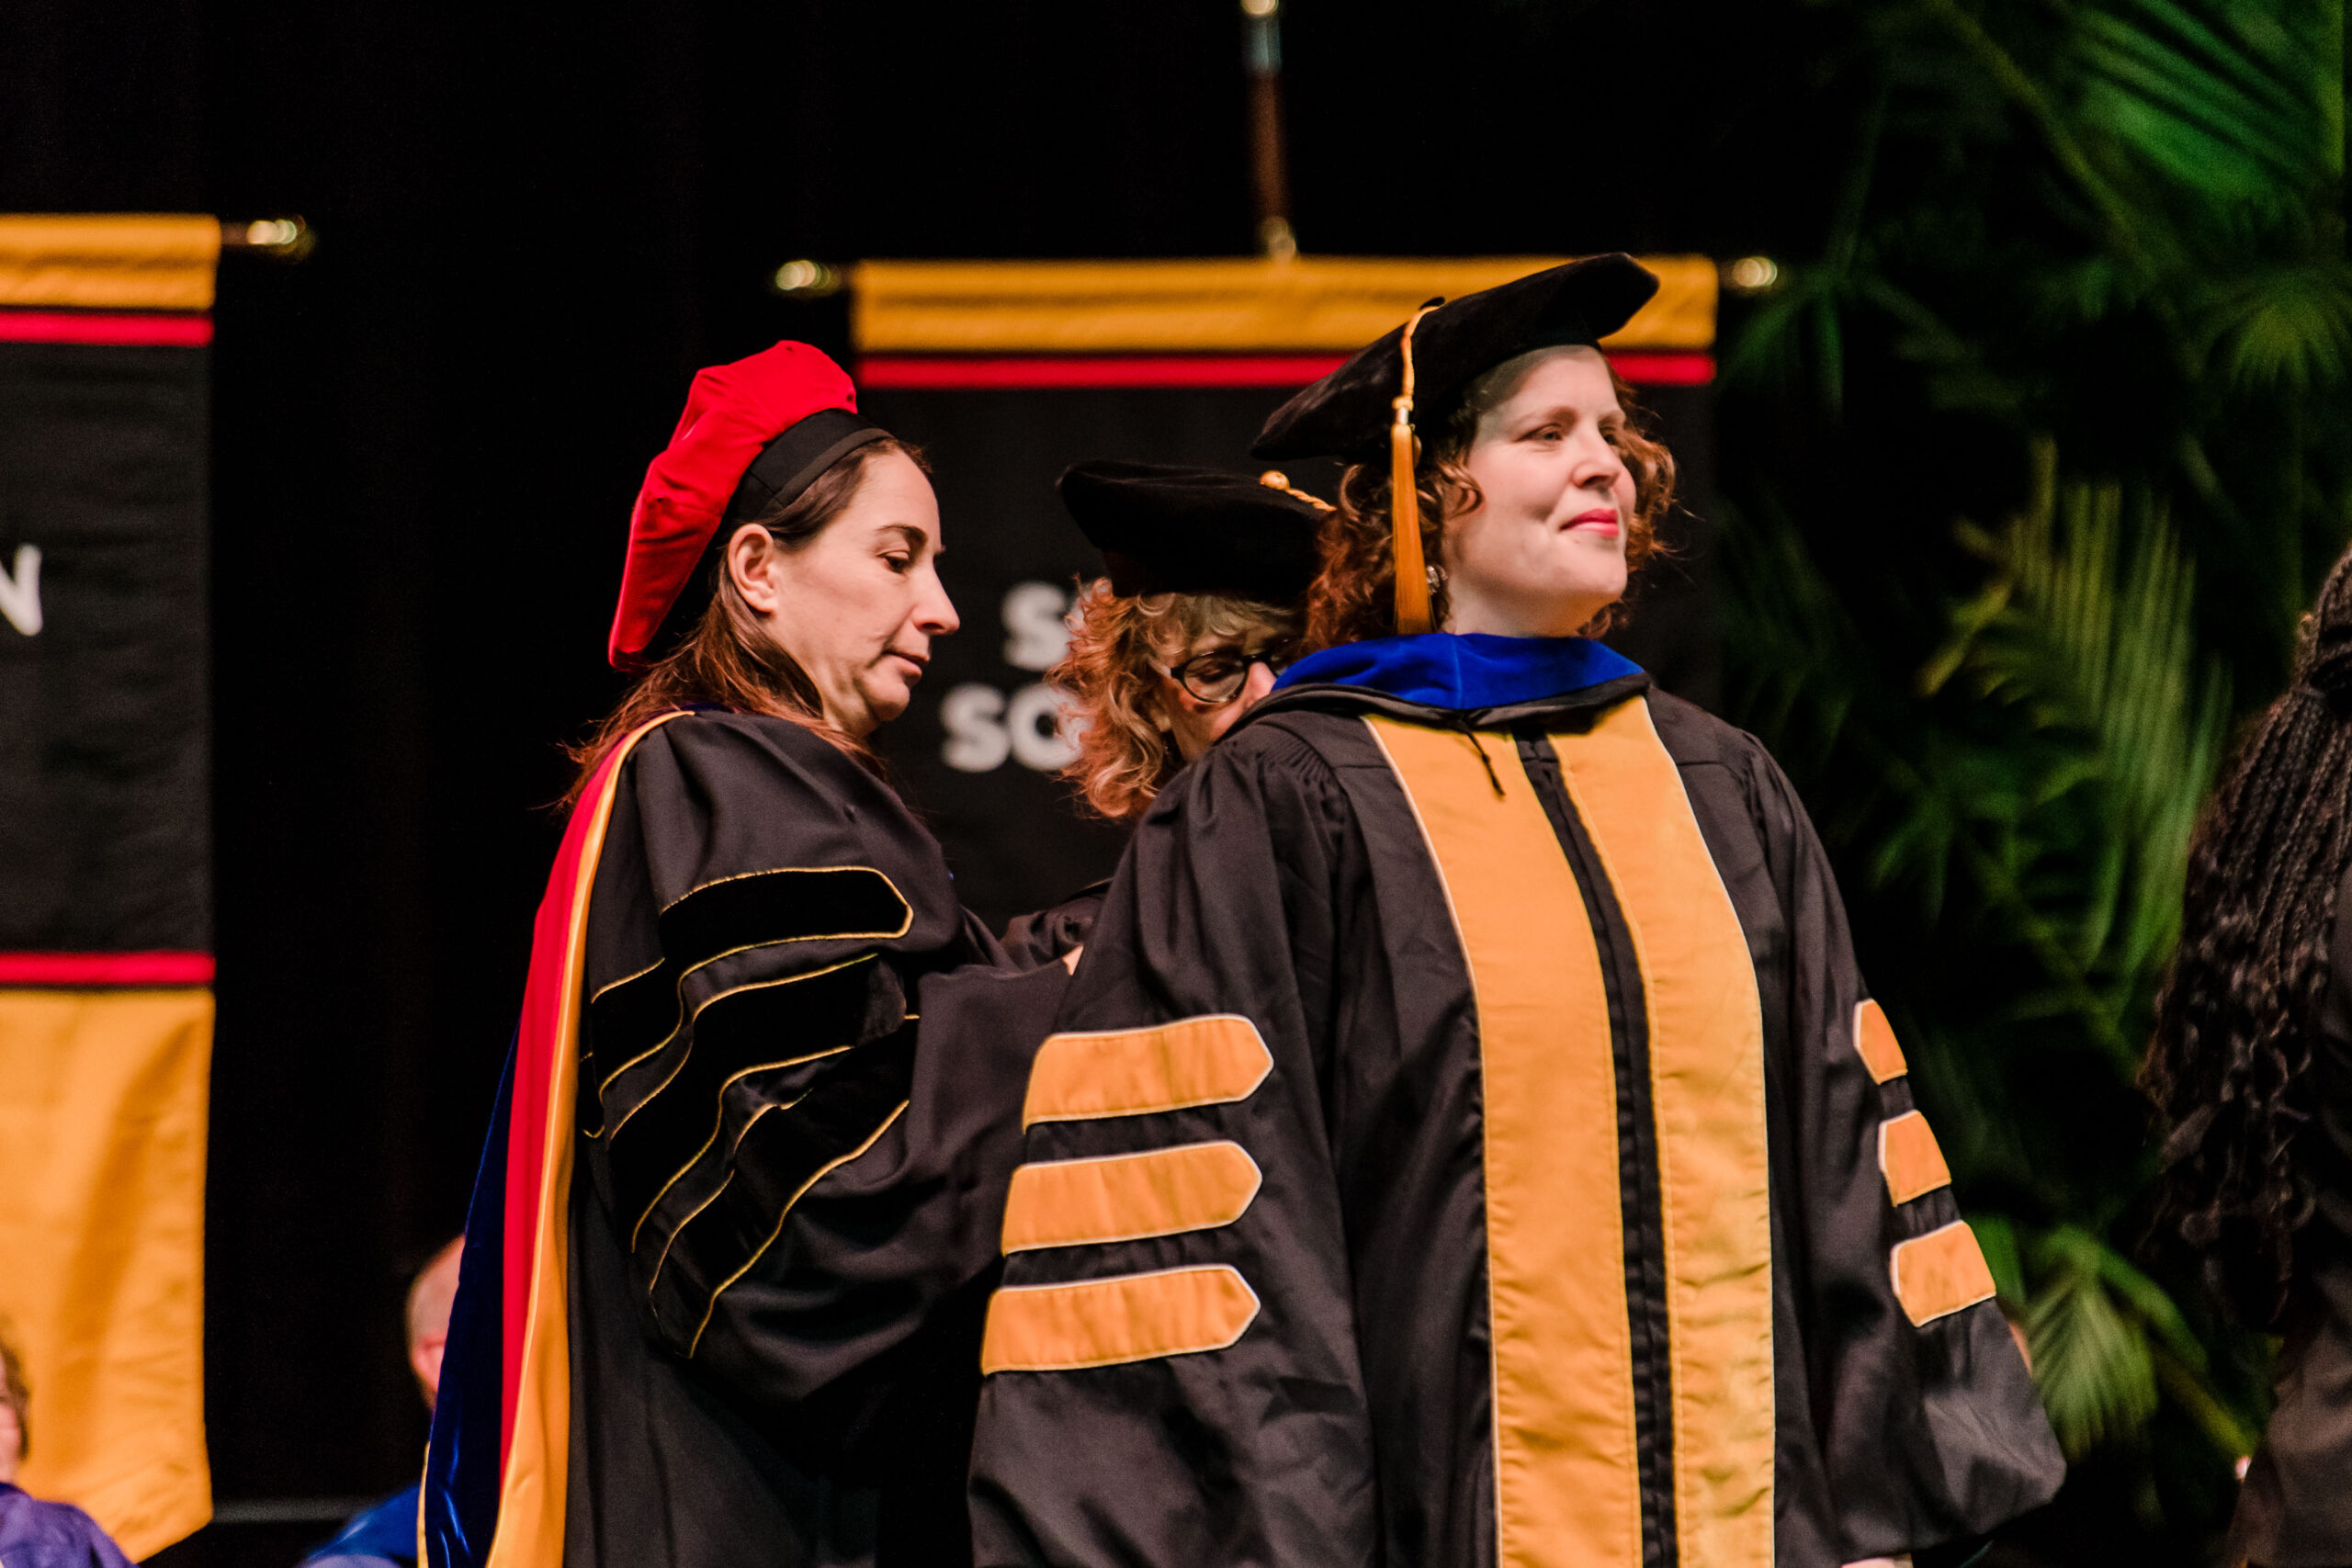 professors in graduation regalia help each other with outfit